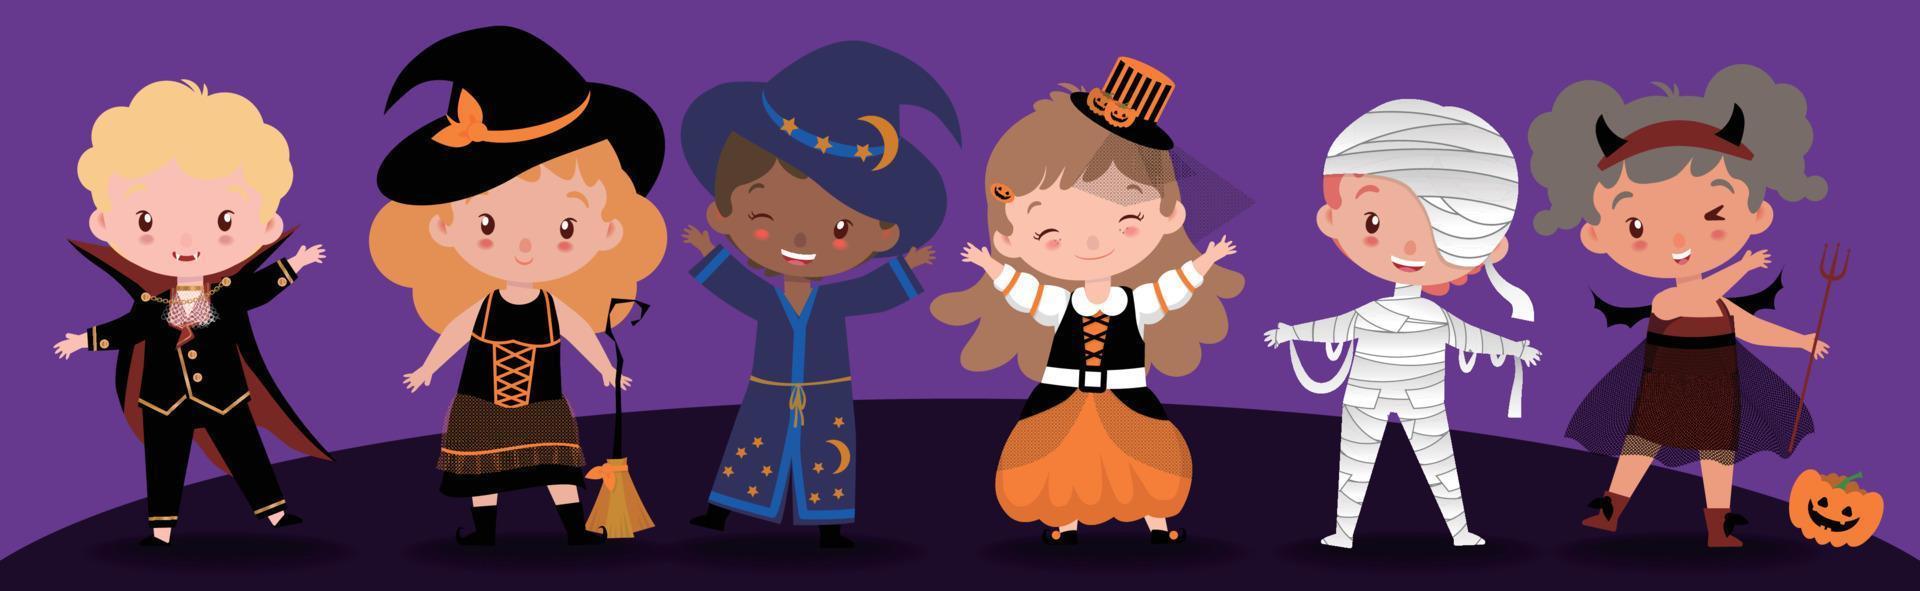 Halloween costumes for cute kids vector